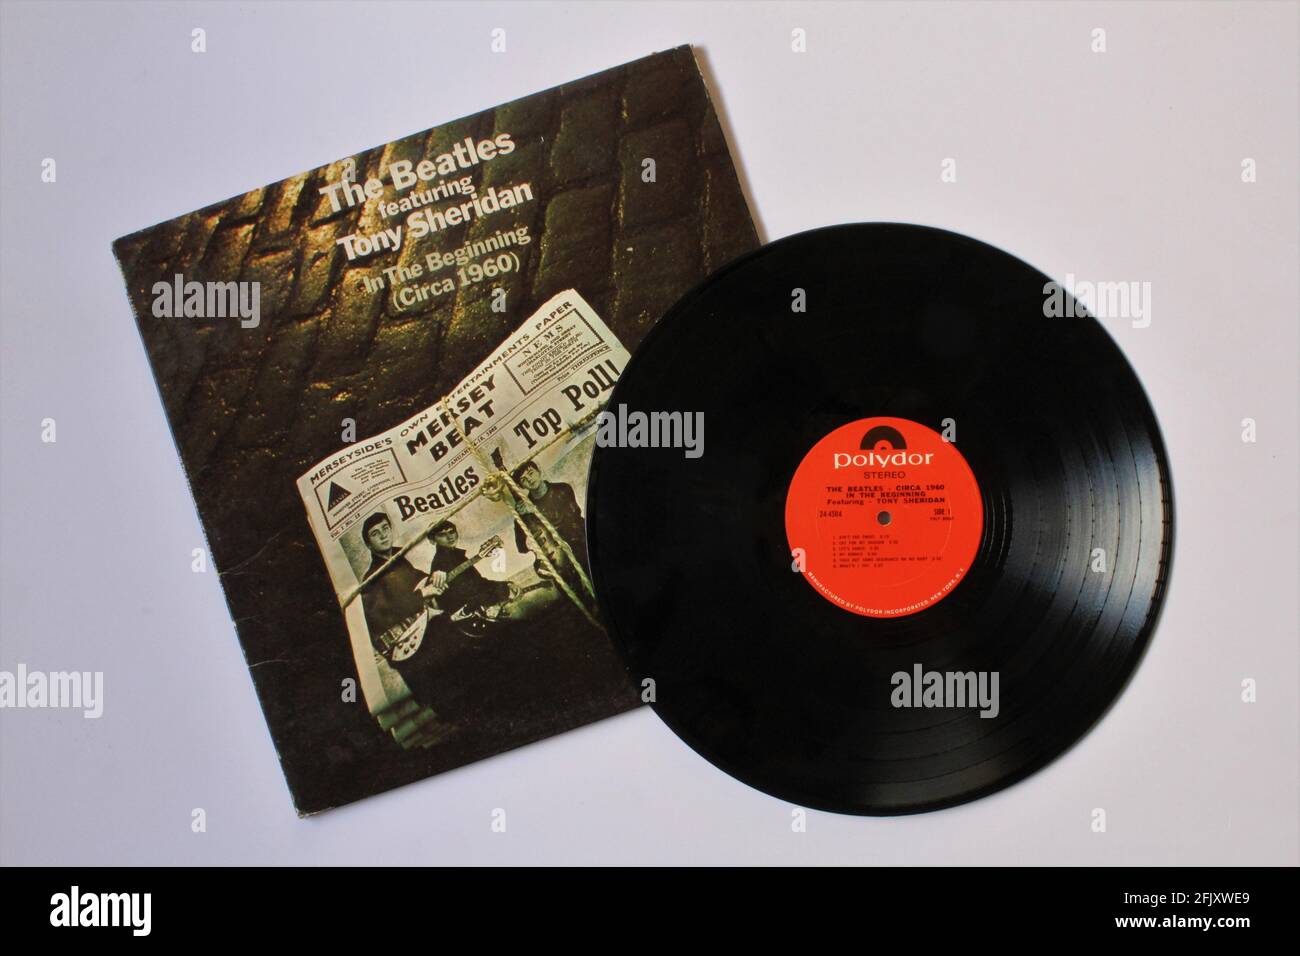 Rock and roll artist, The Beatles featuring Tony Sheridan music album on vinyl record LP disc. Titled: In the Beginning Circa 1960 Stock Photo